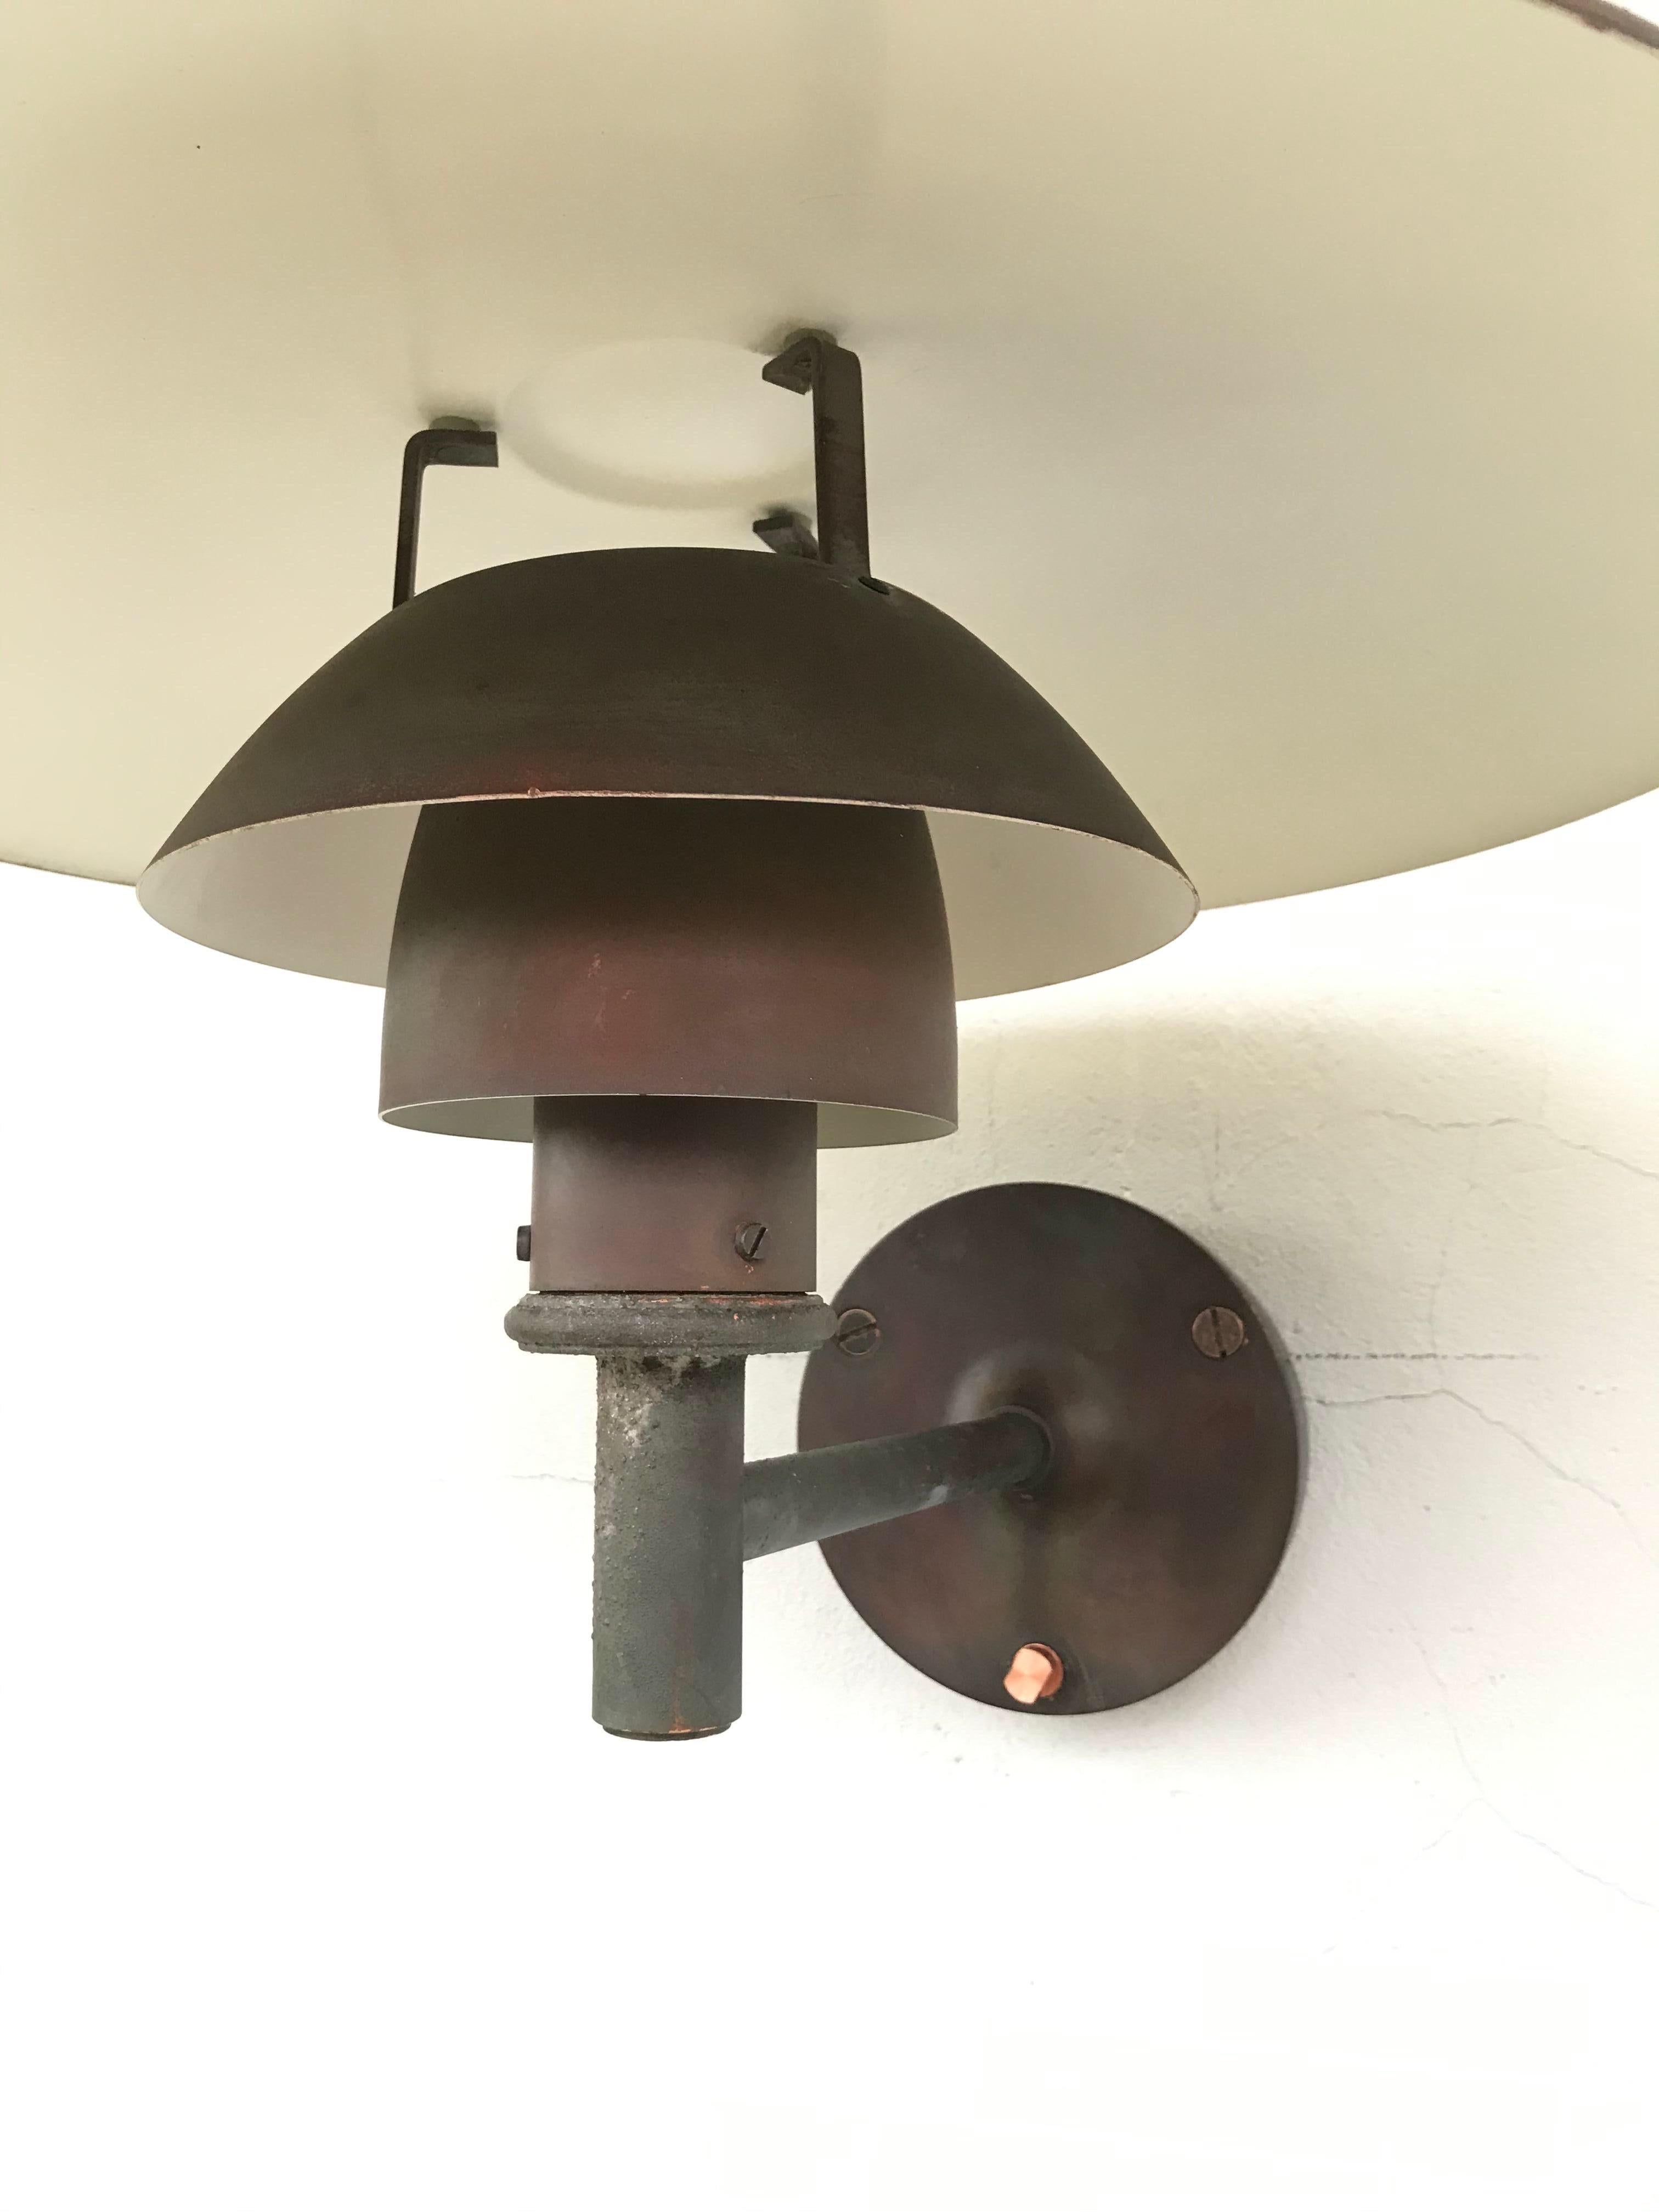 Pair of iconic Vintage Poul Henningsen Copper Wall Lamps by Louis Poulsen of DK 1